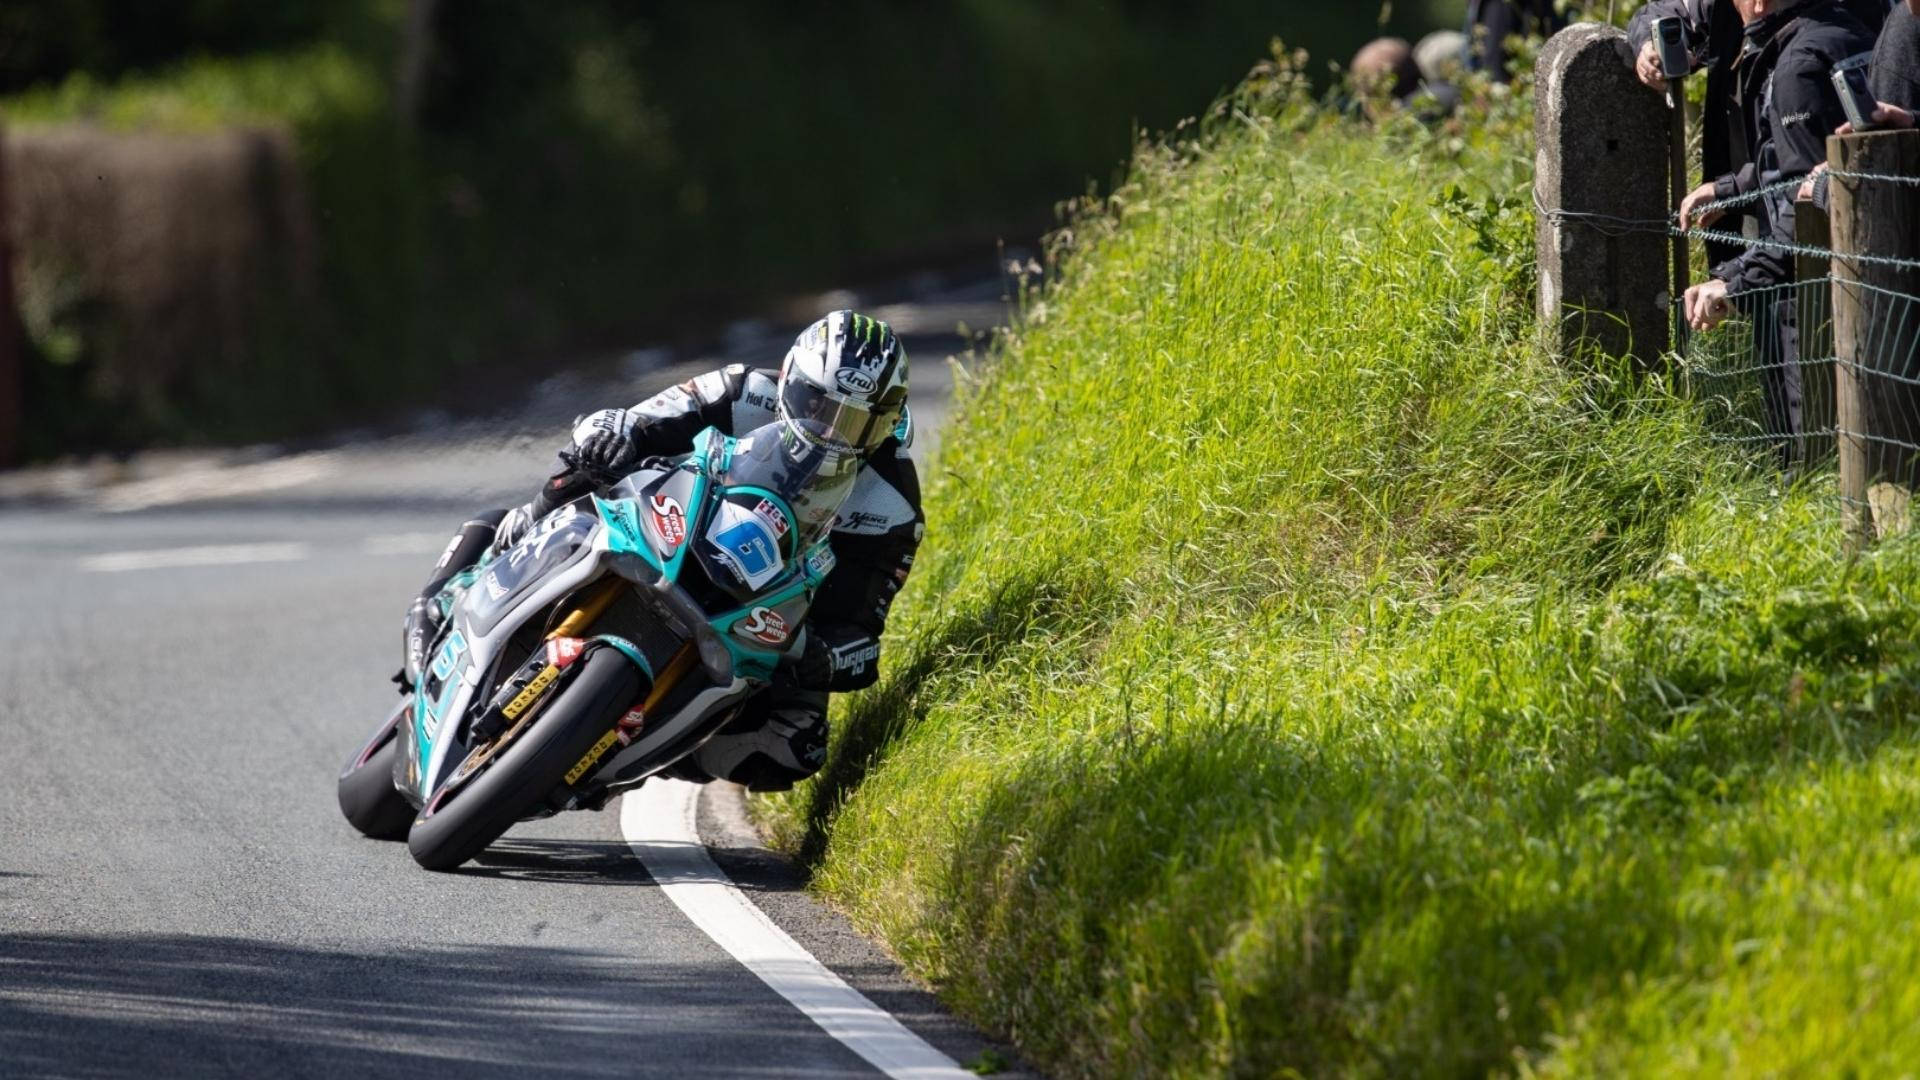 Thrilling Moments At The Isle Of Mann Motorcycle Race